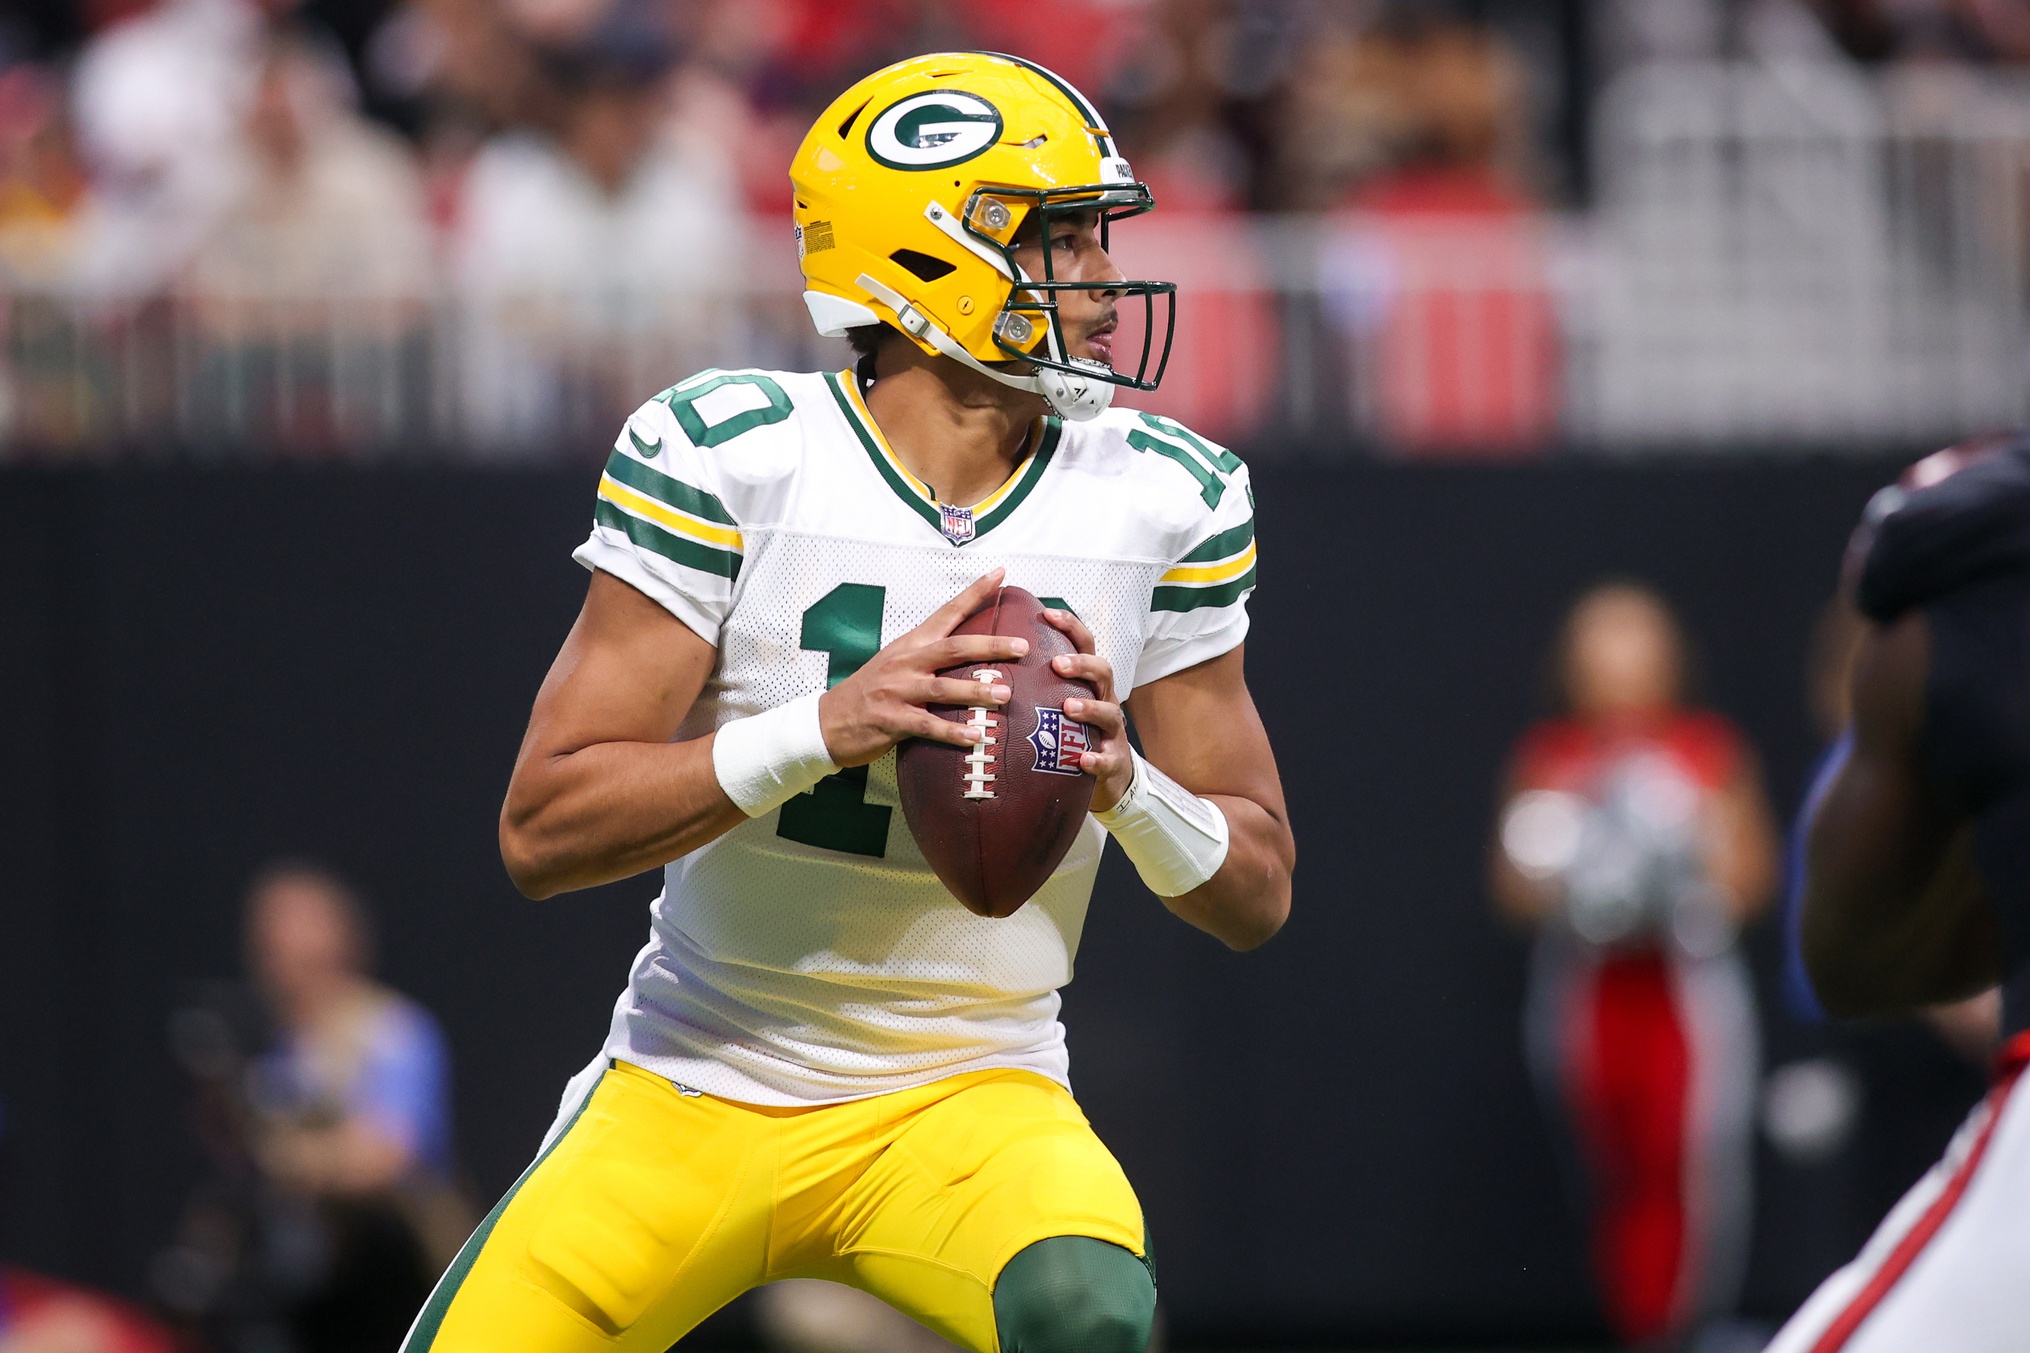 Rapid reaction: Packers have 'real dude' at QB, as Jordan Love keeps rolling